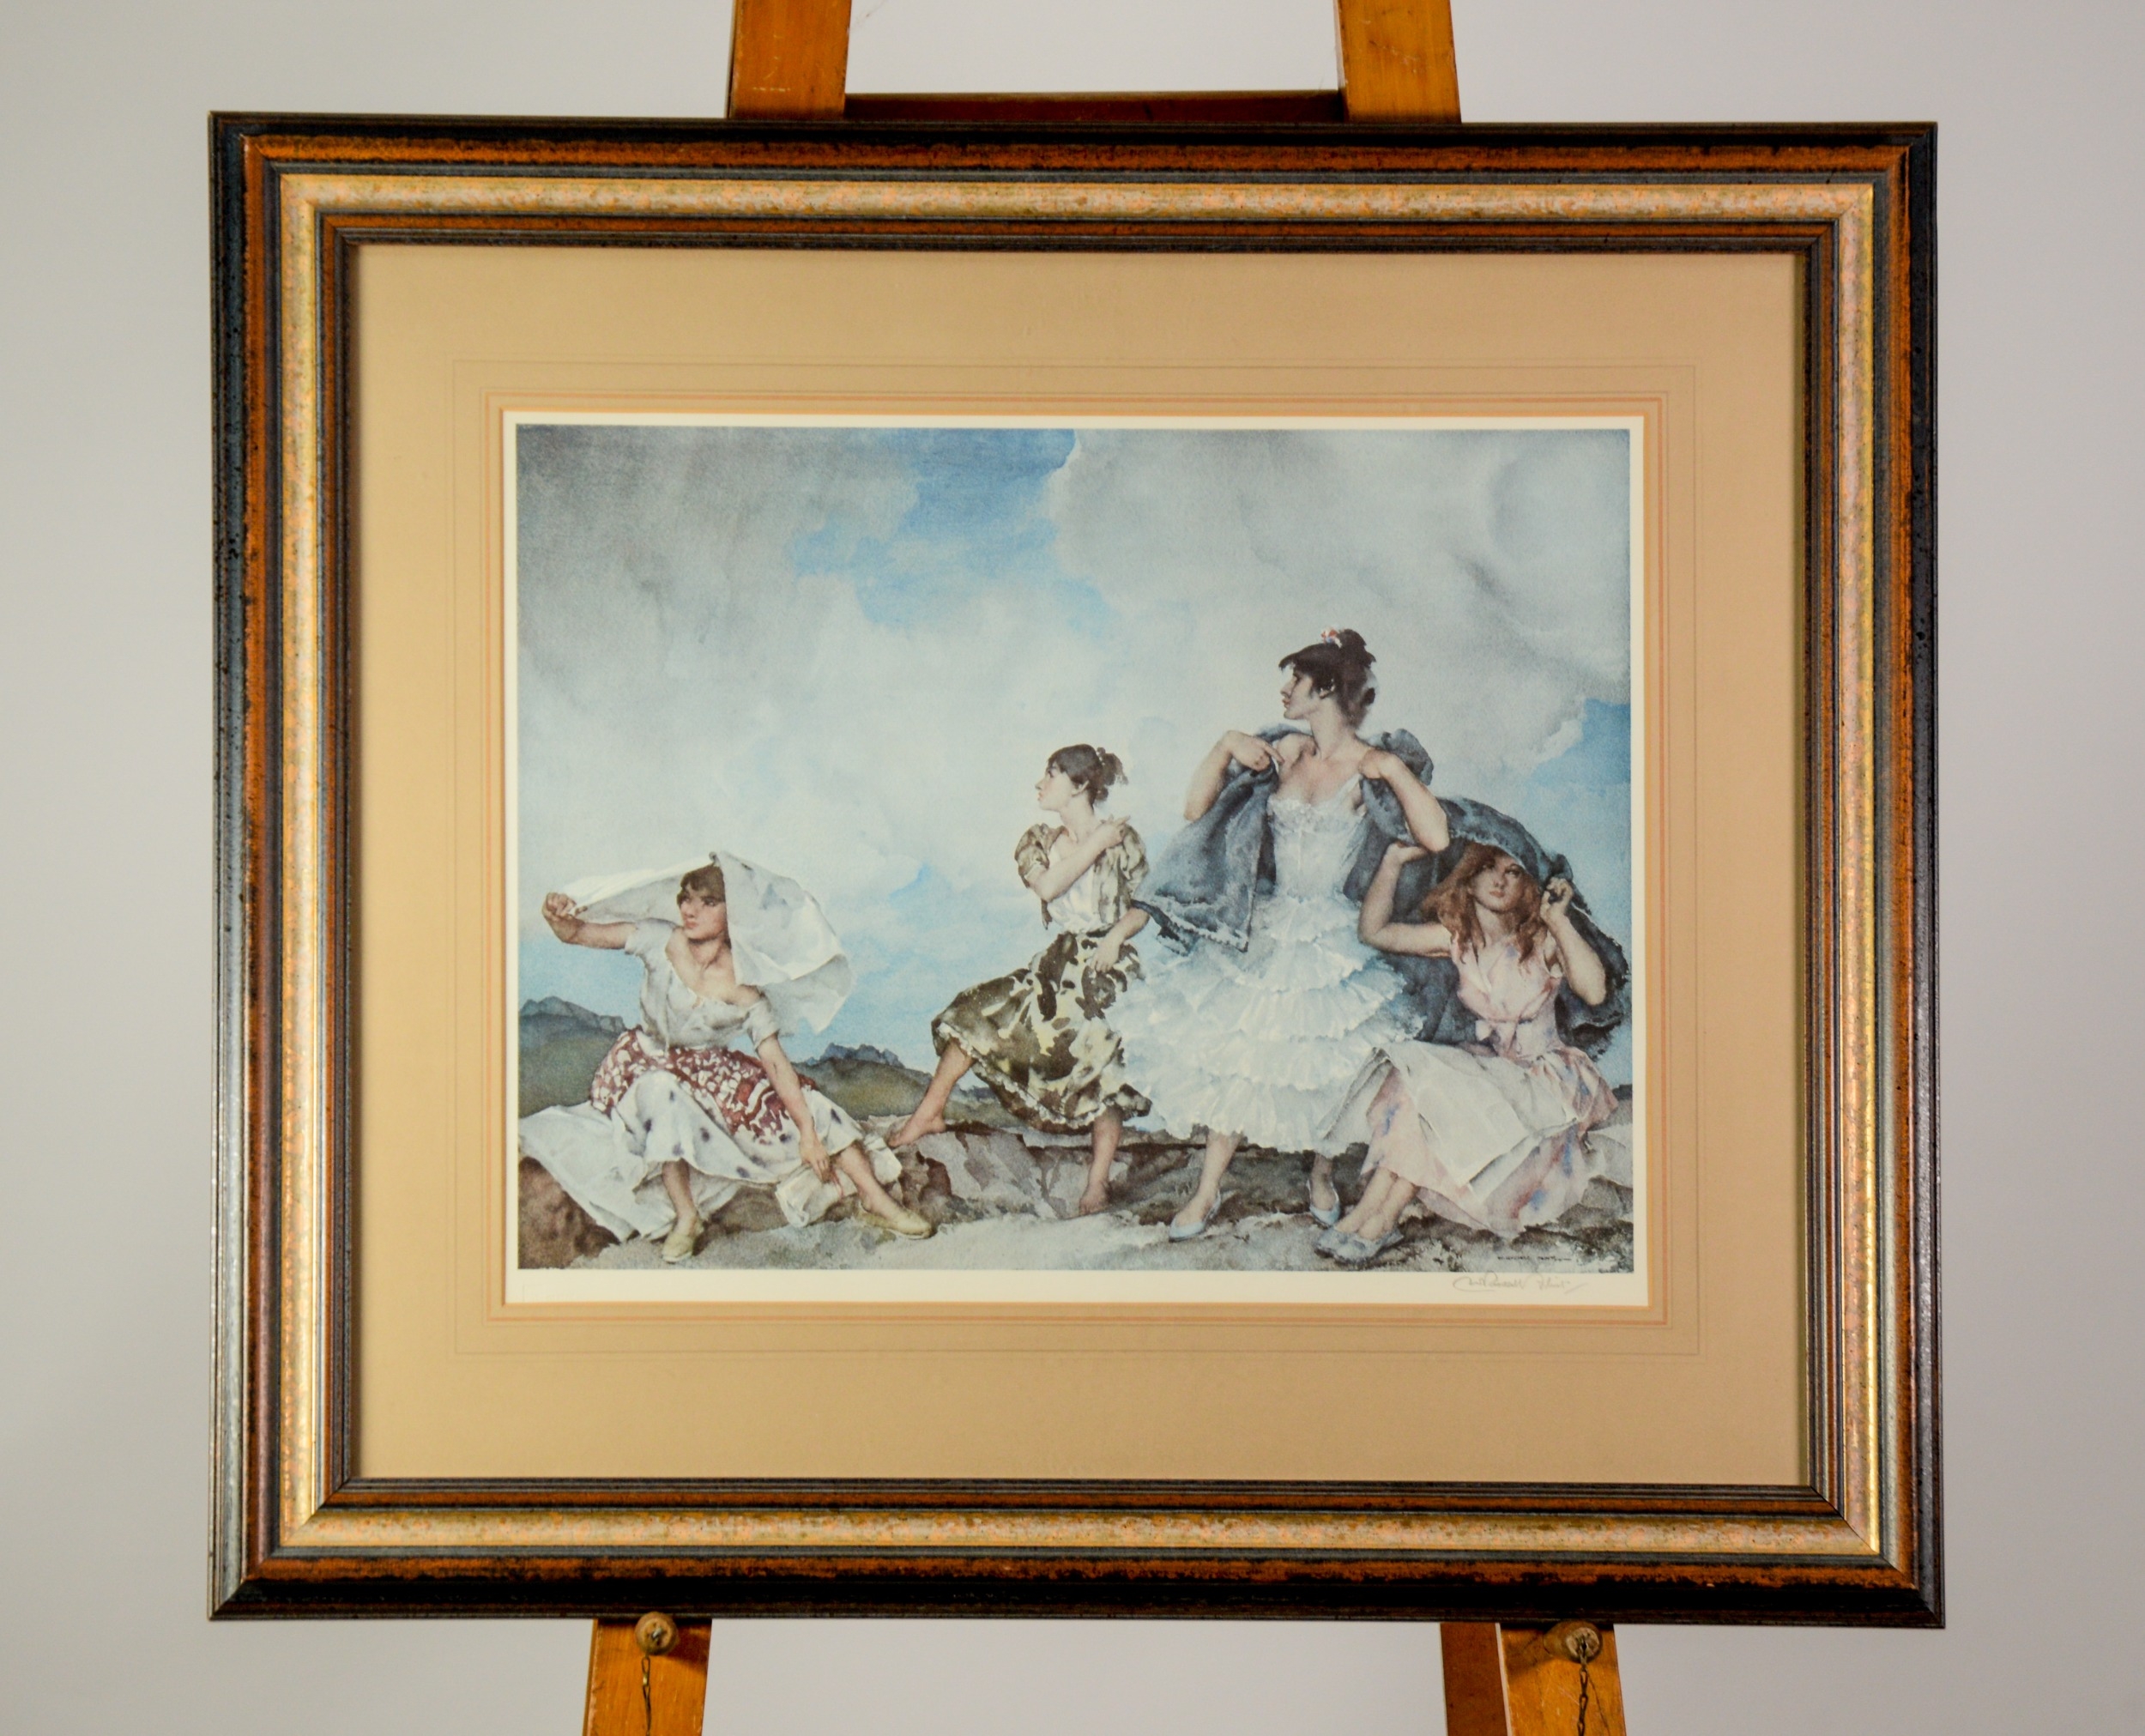 SIR WILLIAM RUSSEL FLINT ARTIST SIGNED LIMITED EDITION COLOUR PRINT ‘The Shower’ Signed and with - Image 2 of 2